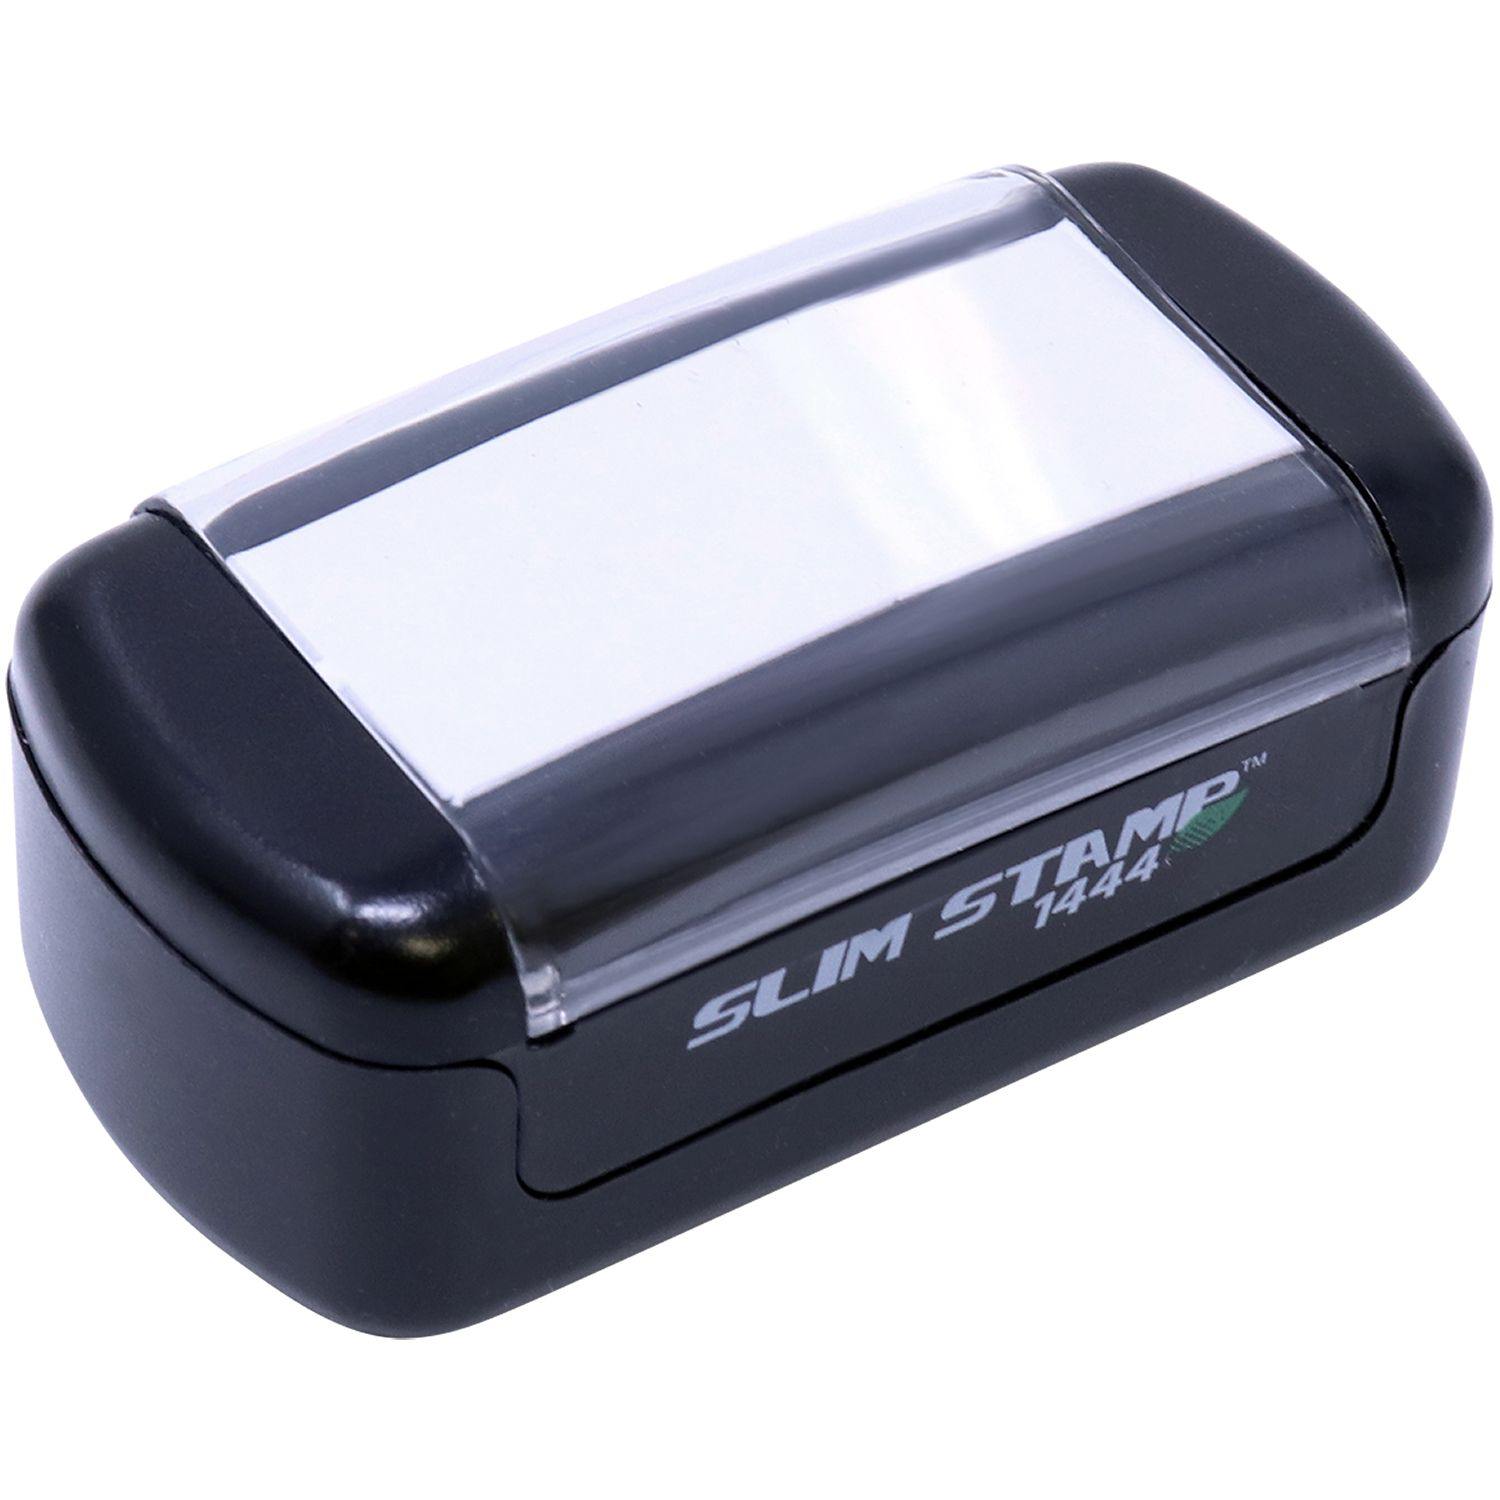 Top Down View of Slim Pre-Inked Times Faxed Stamp